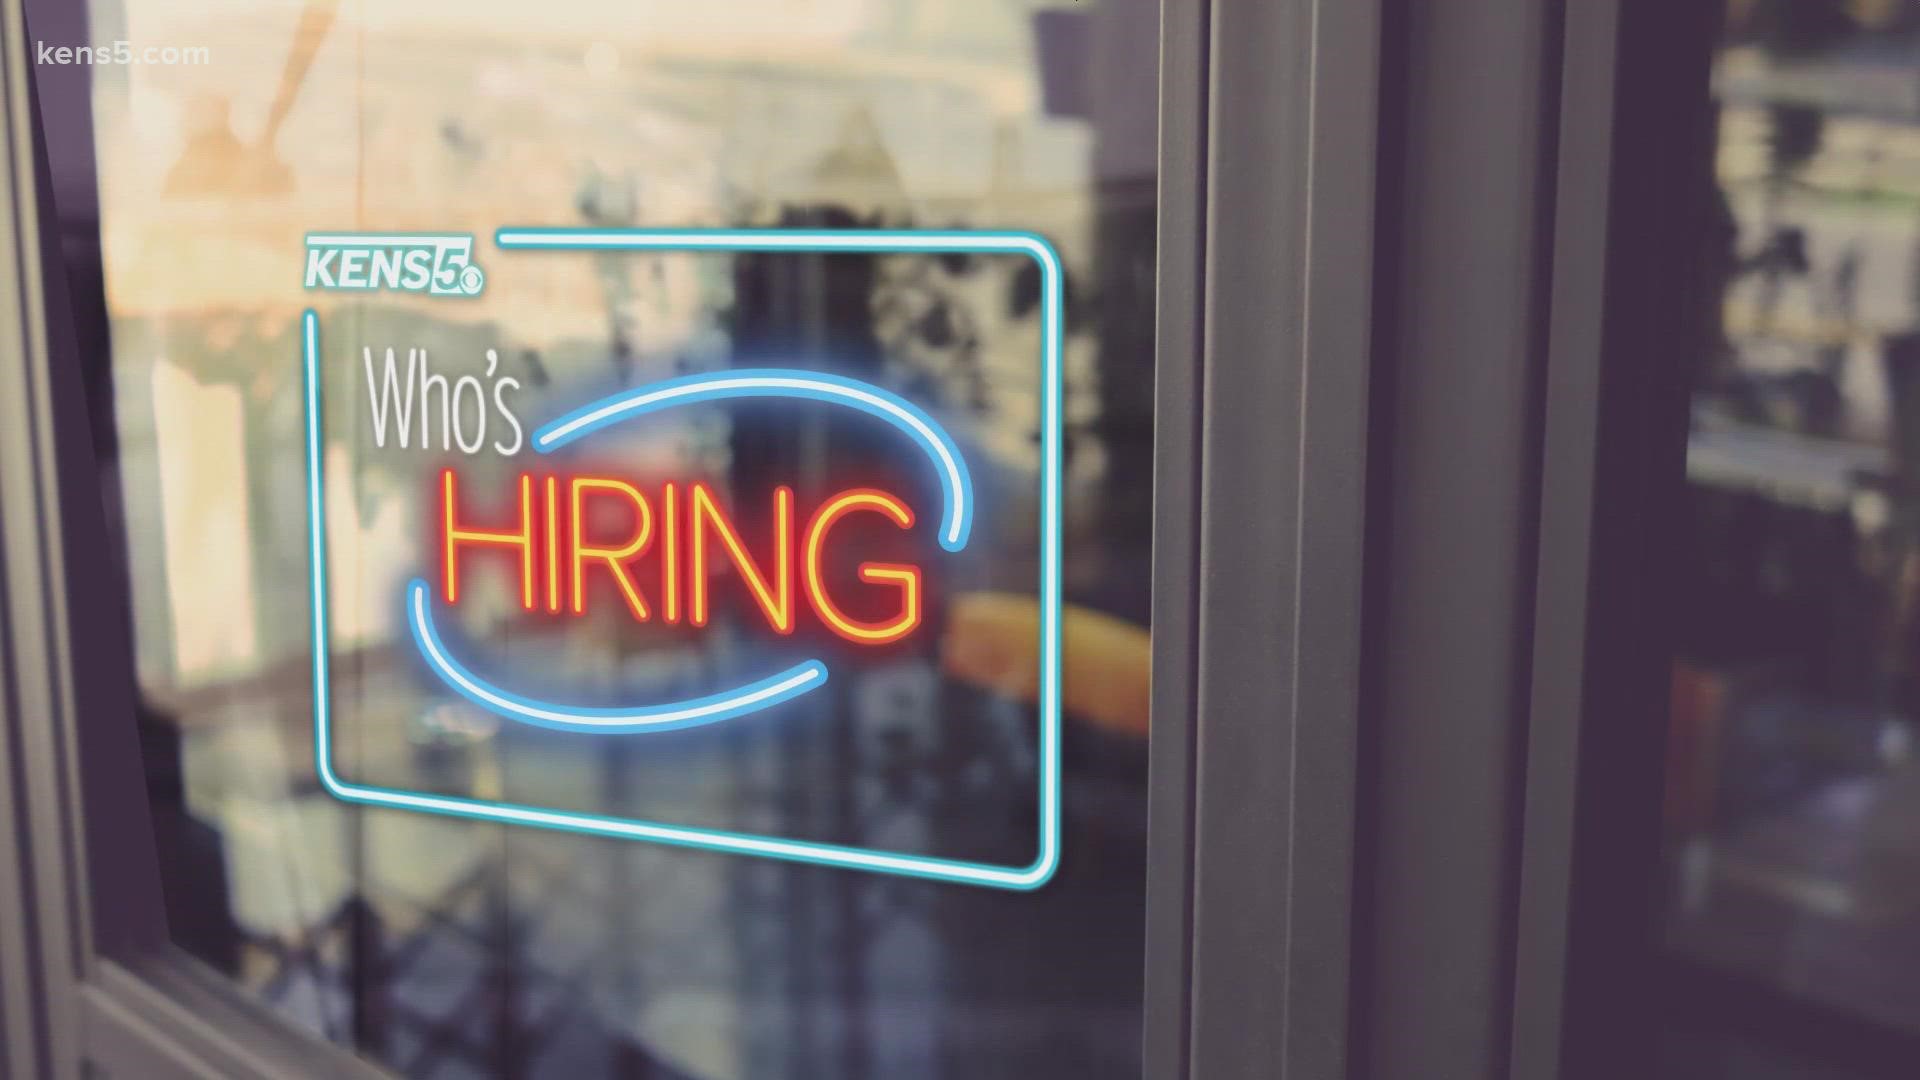 Here's a look at who's hiring in the San Antonio area!